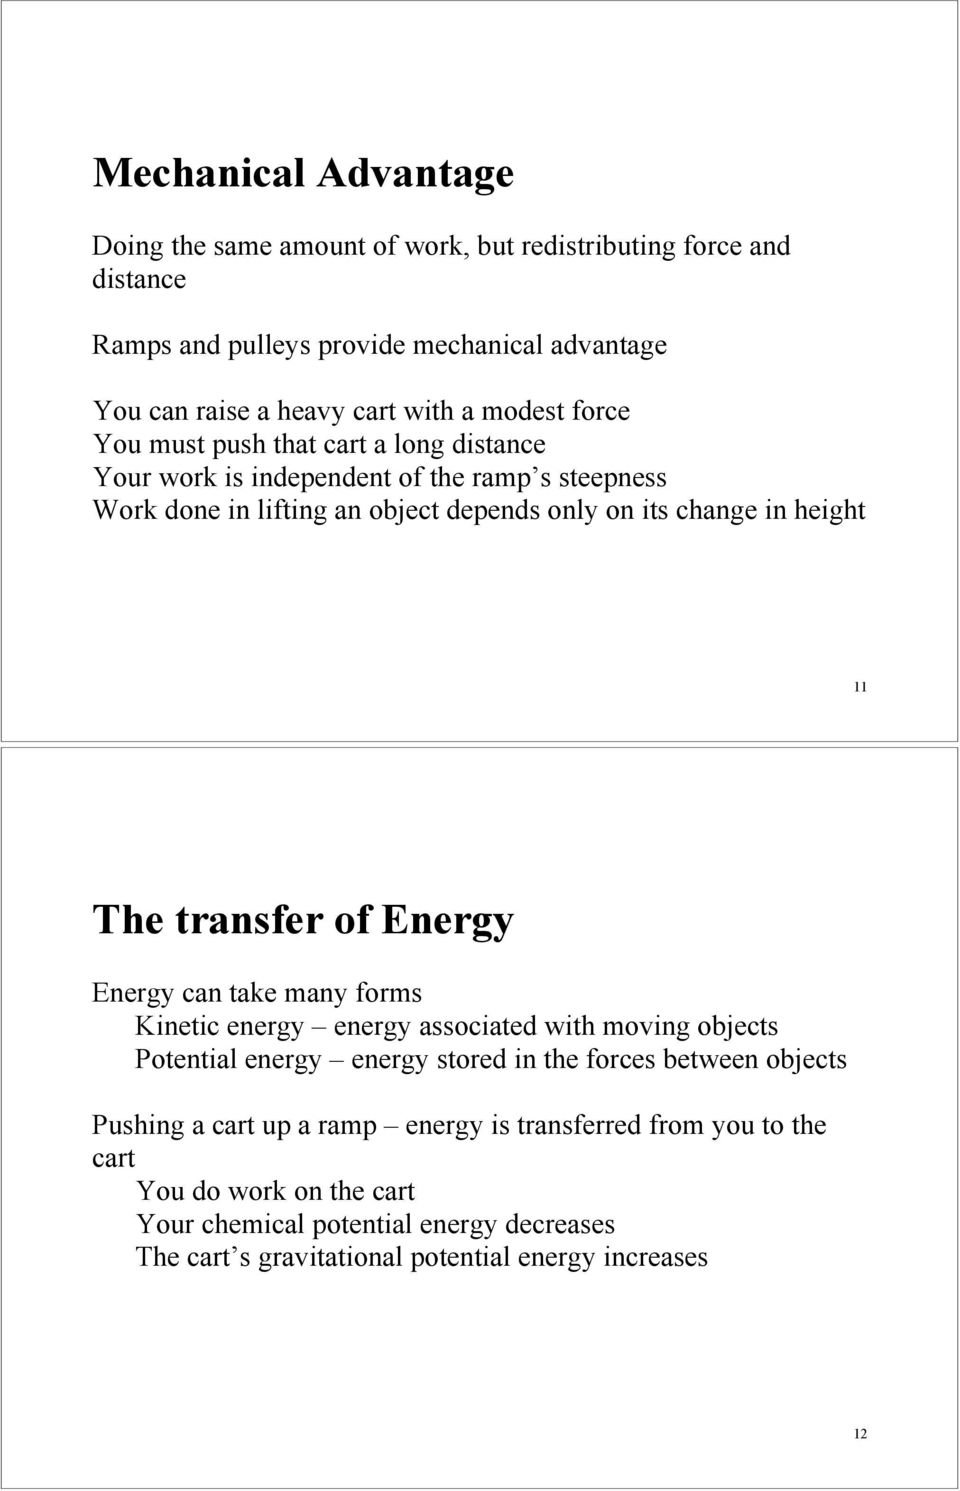 The transfer of Energy Energy can take many forms Kinetic energy energy associated with moving objects Potential energy energy stored in the forces between objects Pushing a